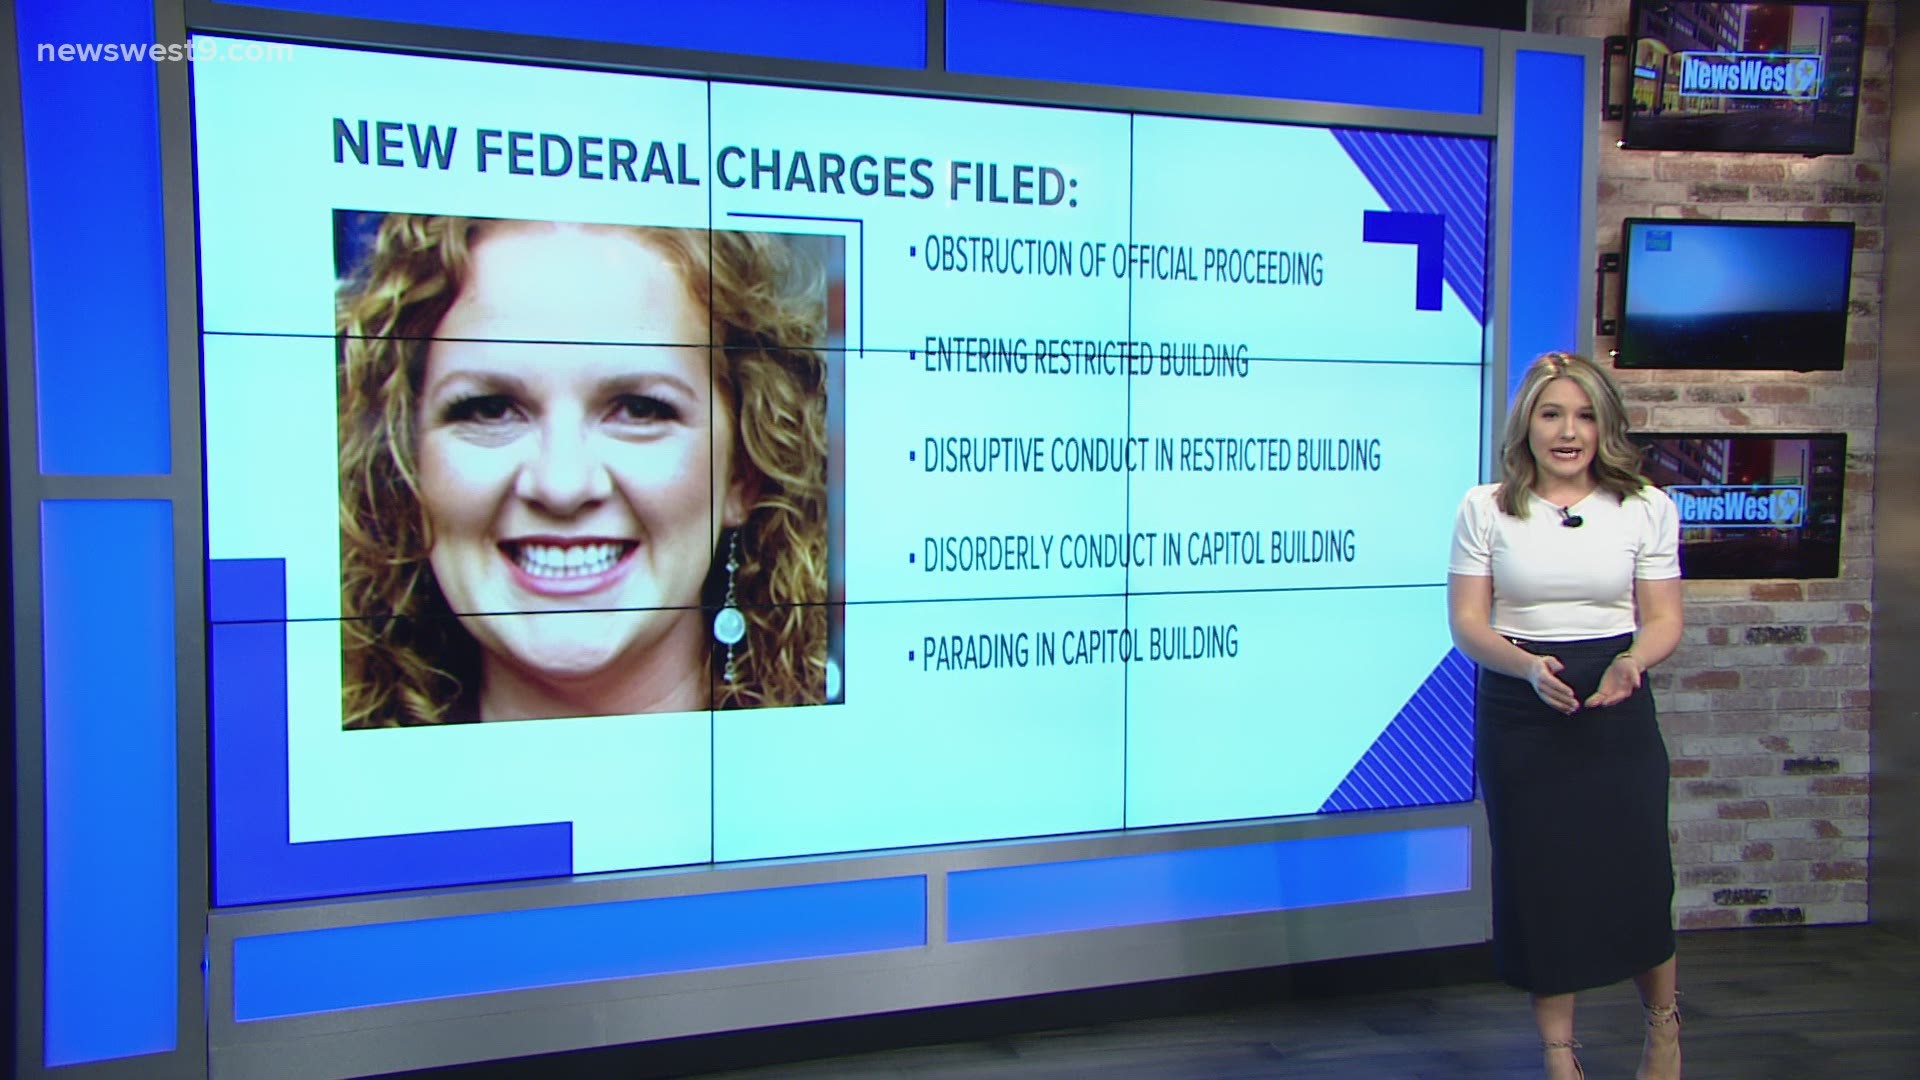 Cudd had previously been facing only misdemeanor charges following her arrest in January by the FBI.